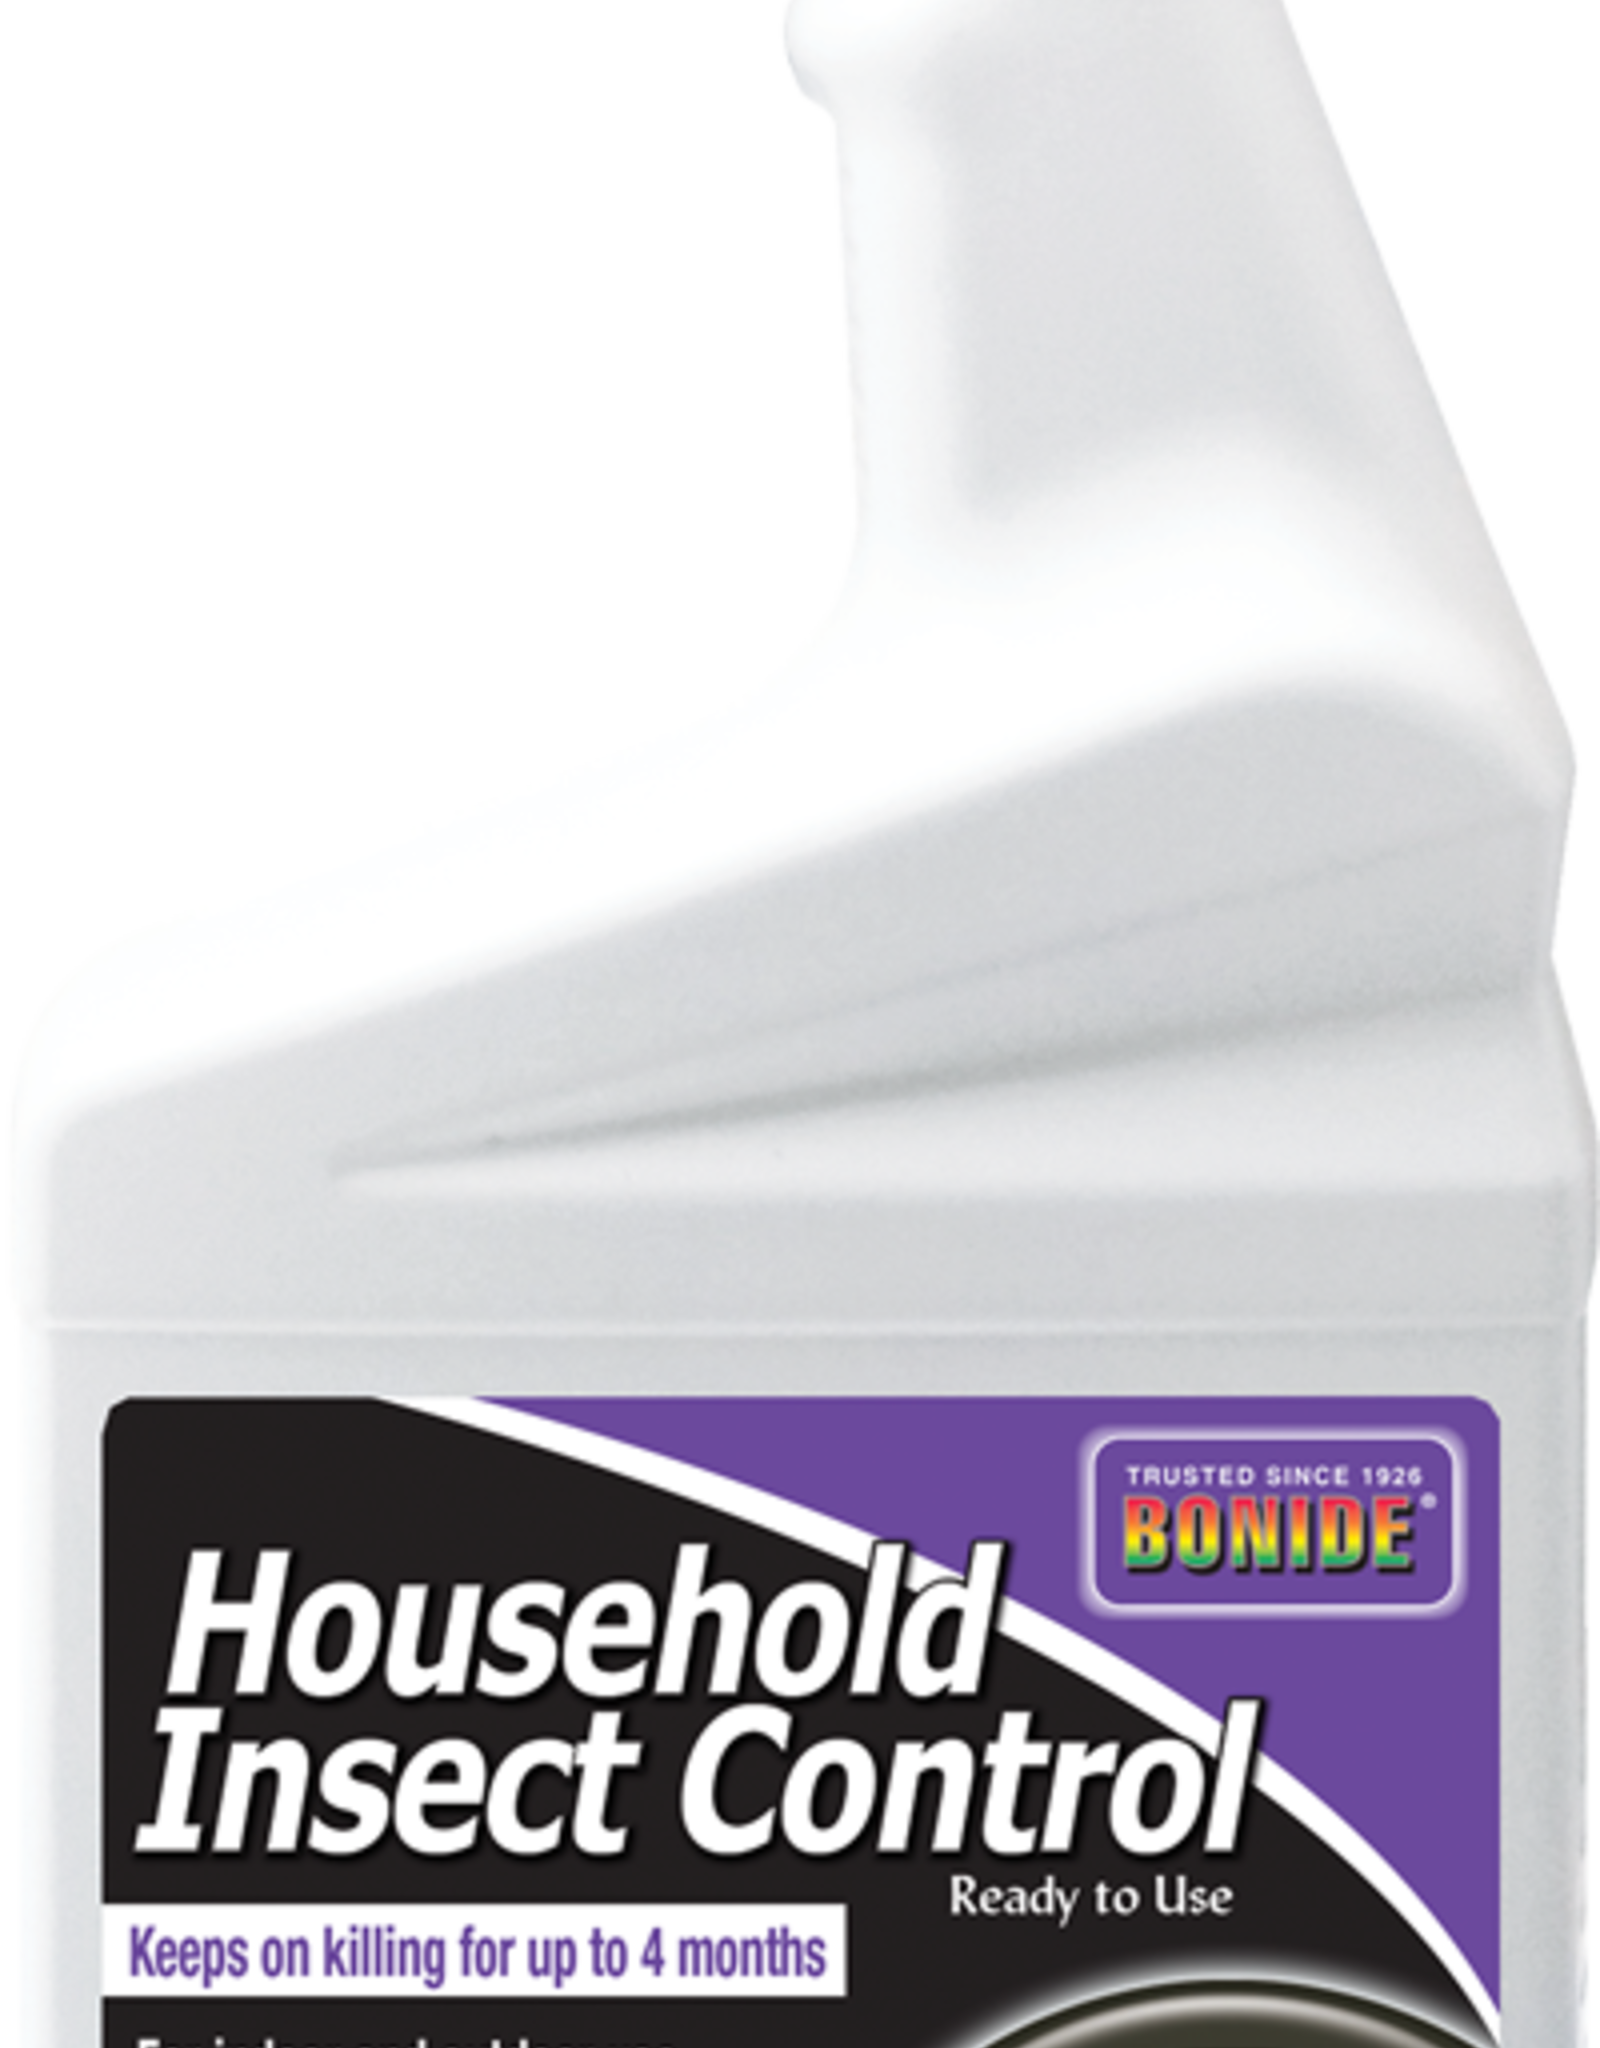 BONIDE PRODUCTS INC     P BONIDE HOUSEHOLD INSECT CONTROL (READY TO USE) 32OZ